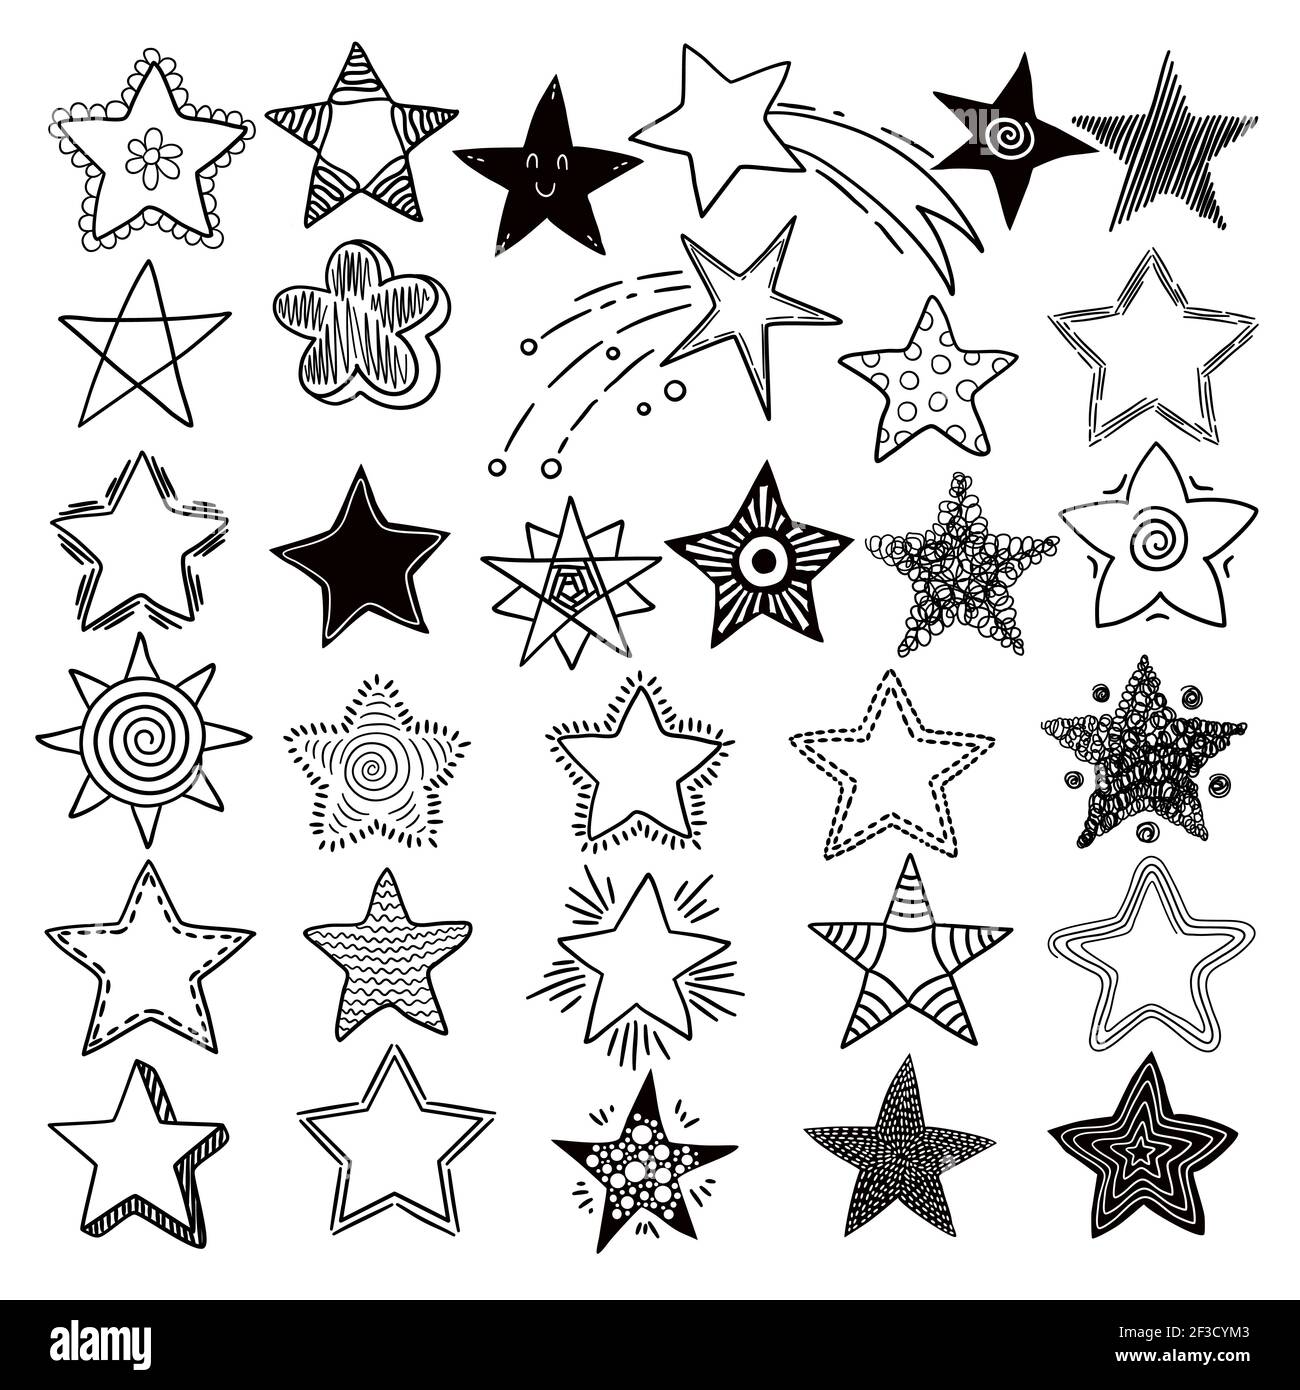 Stars. Space symbols planets elements hand drawn collection space stars vector doodle pictures Stock Vector